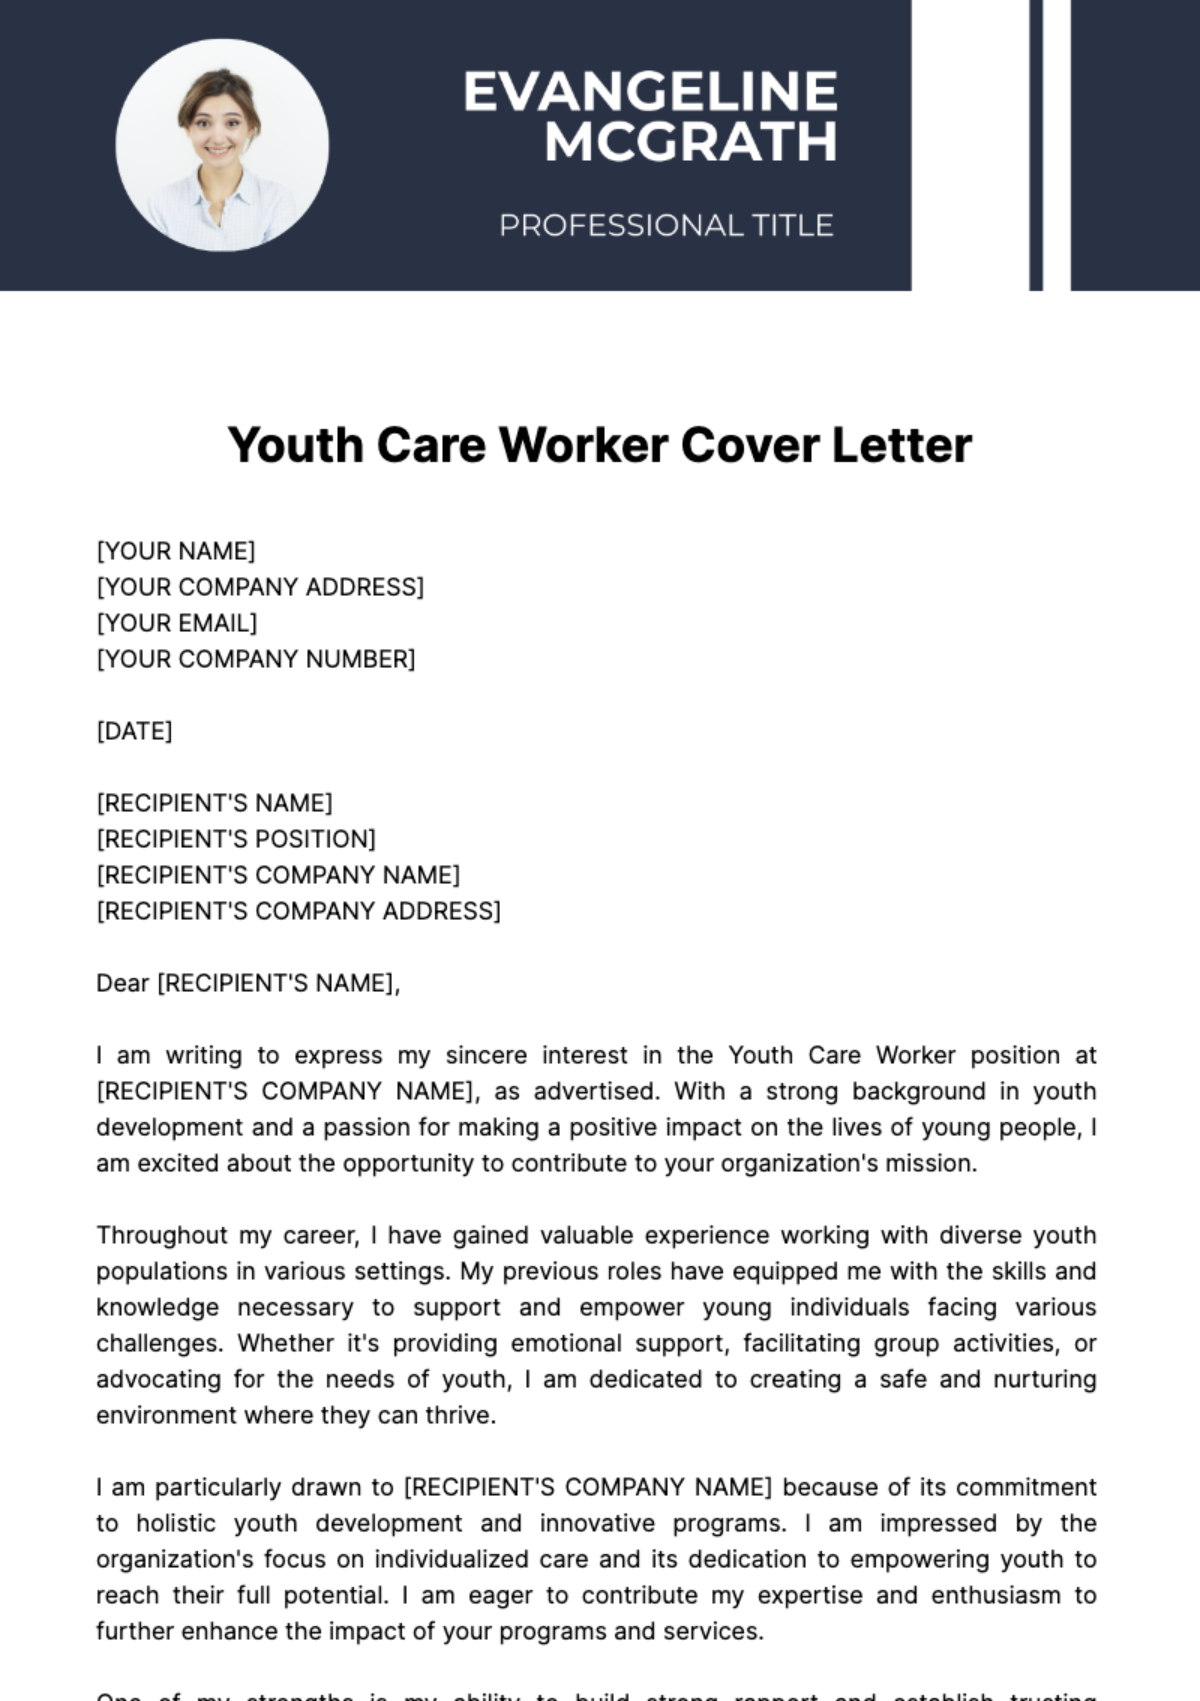 Youth Care Worker Cover Letter Template